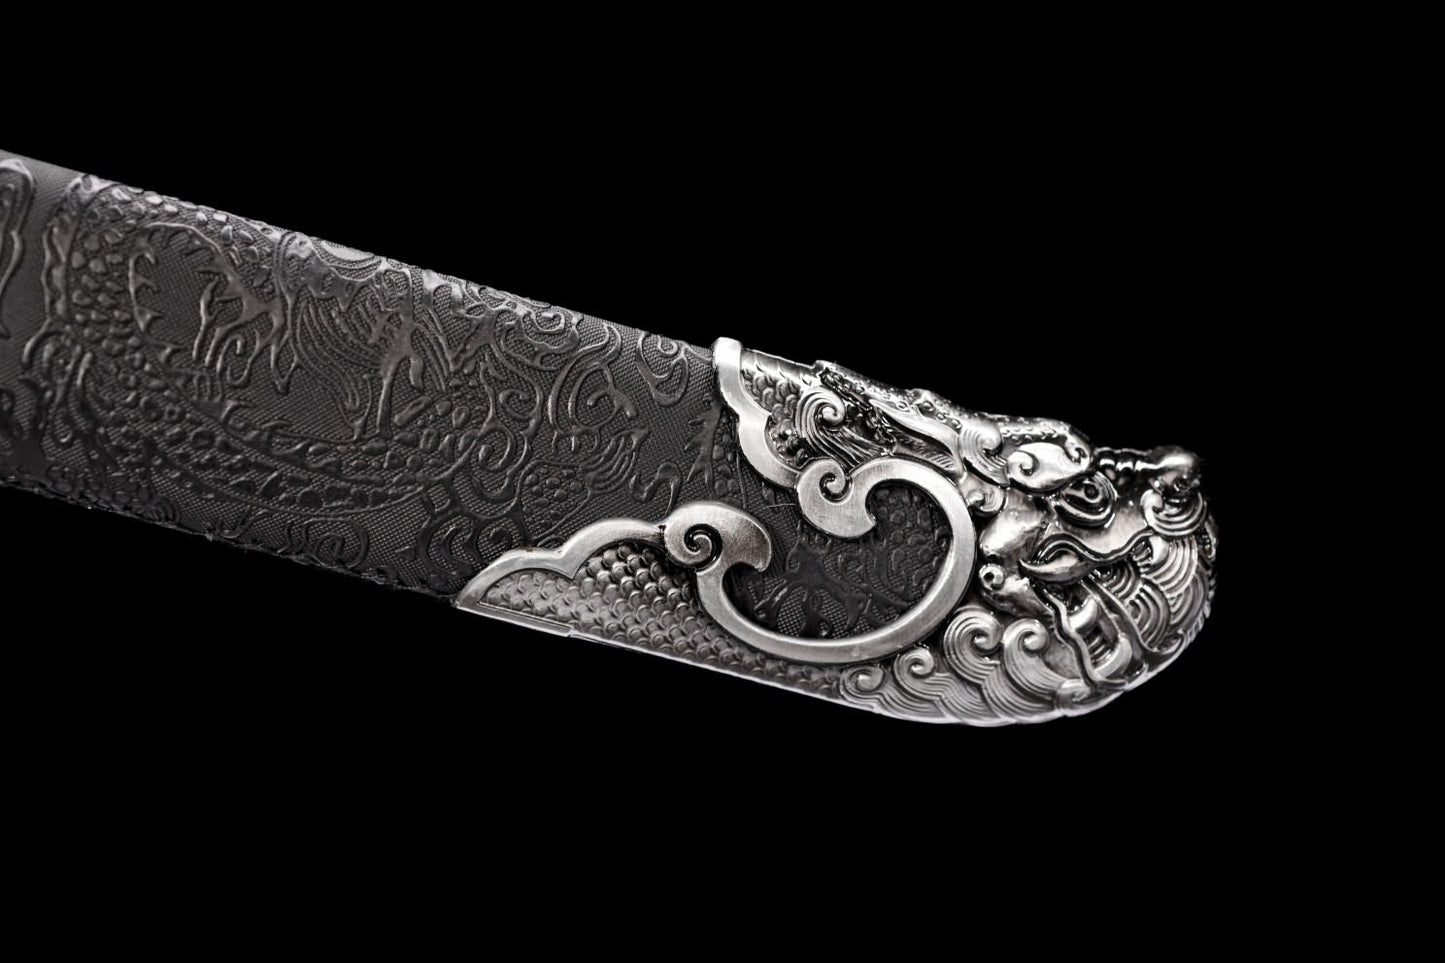 Qing dao Sword - Hand Forged High Carbon Steel Blade Blade with Alloy Fittings